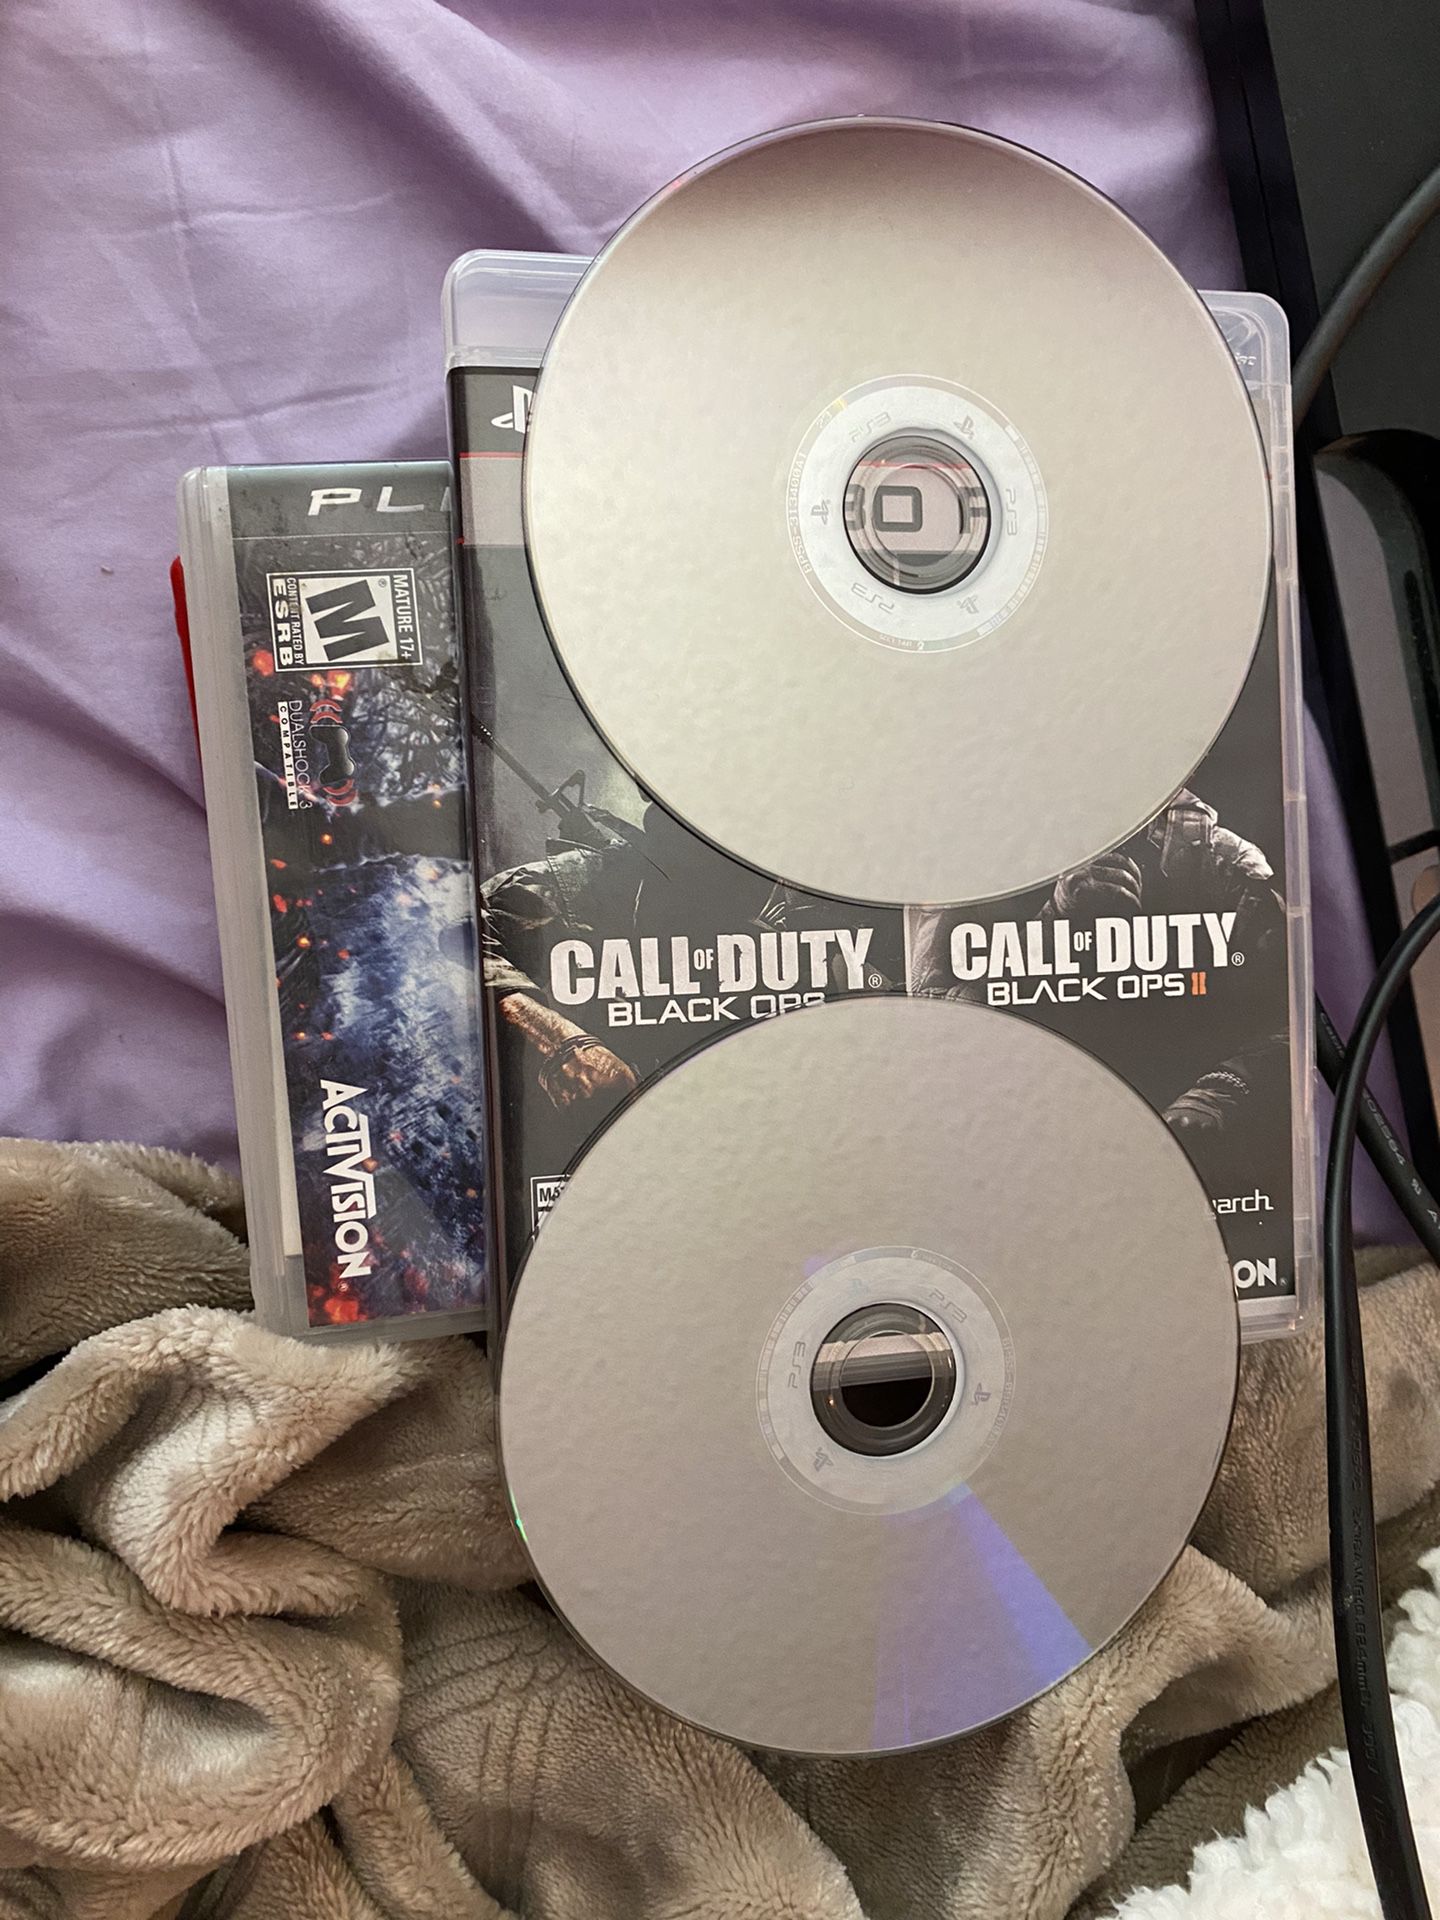 Call of duty black ops 1 and 2